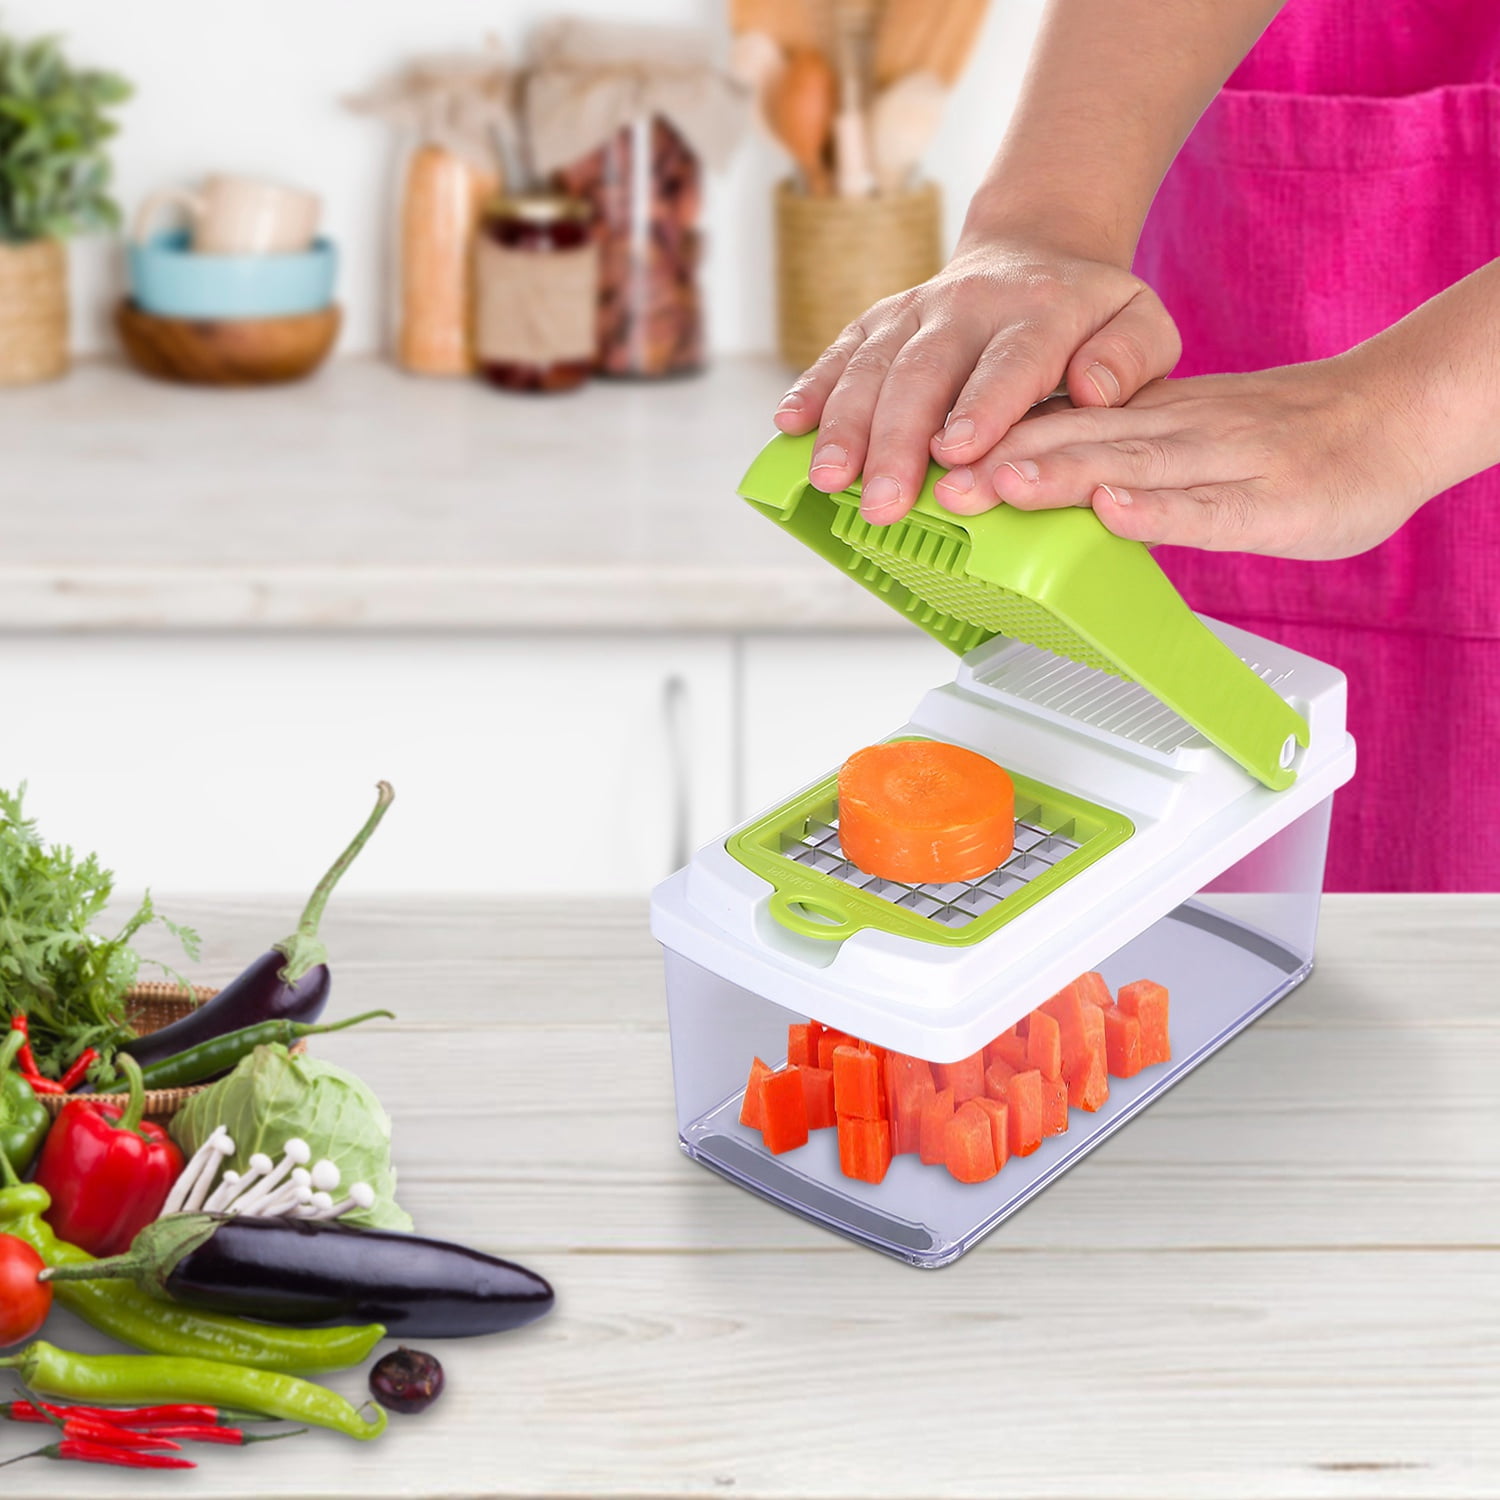 Dropship Miibox Vegetable Chopper With Container 22-in-1 Veggie